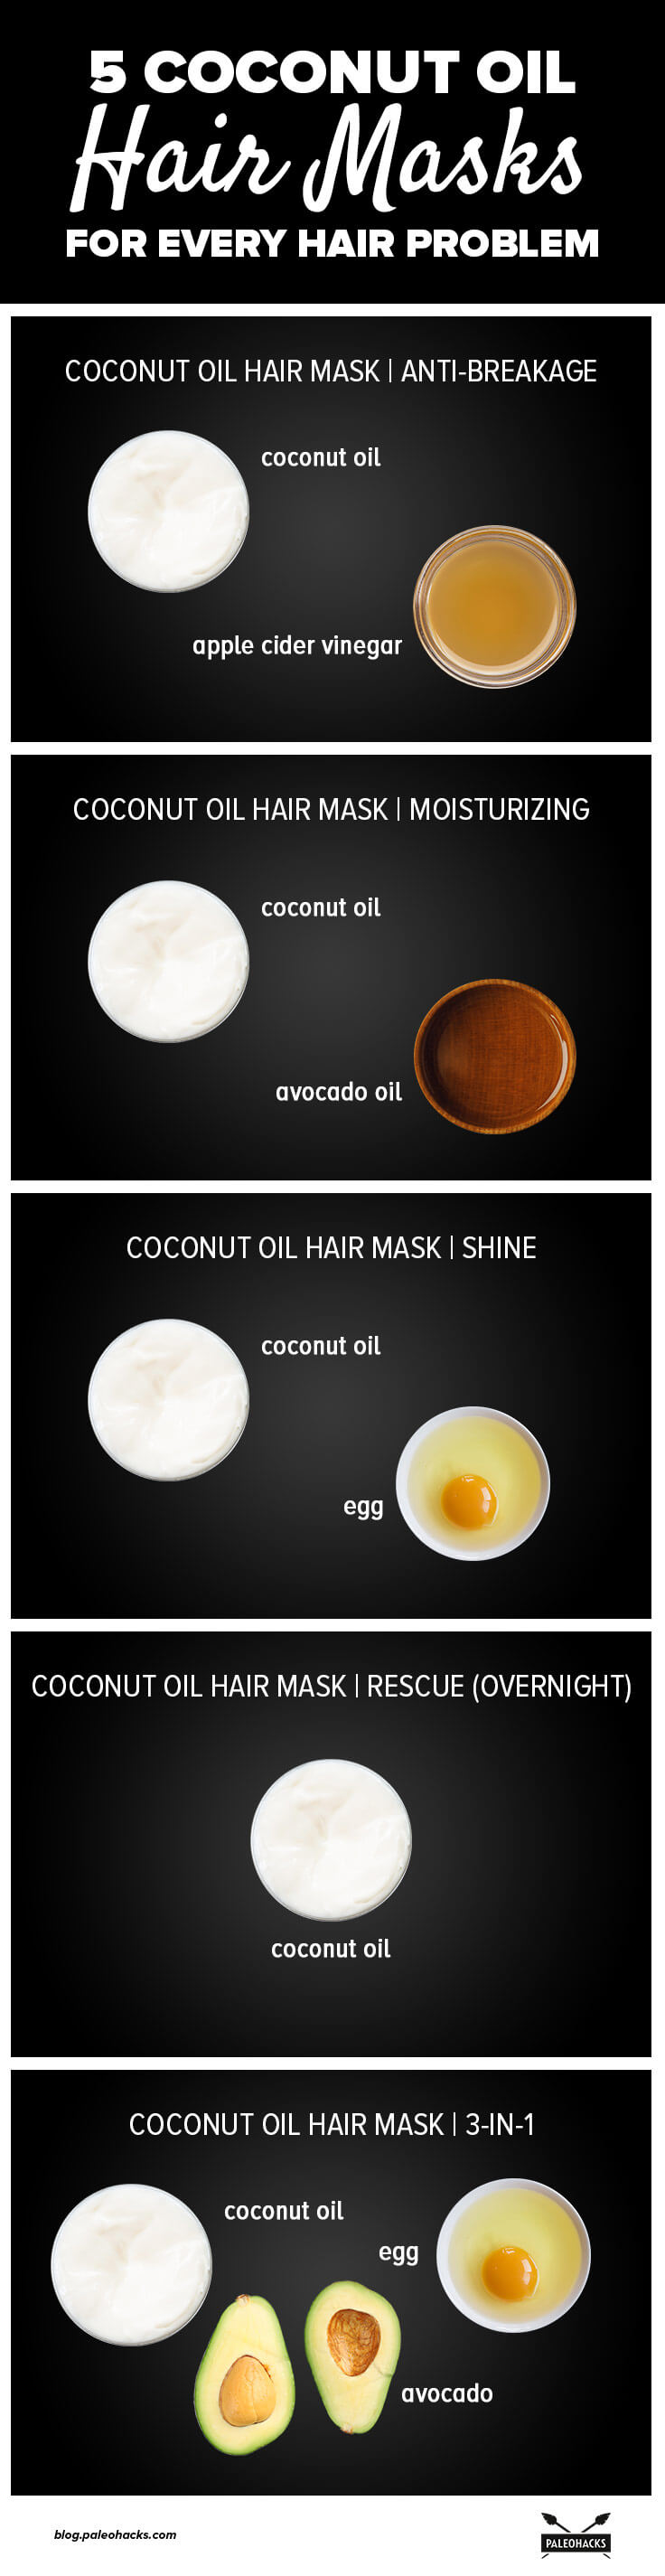 hair mask infographic